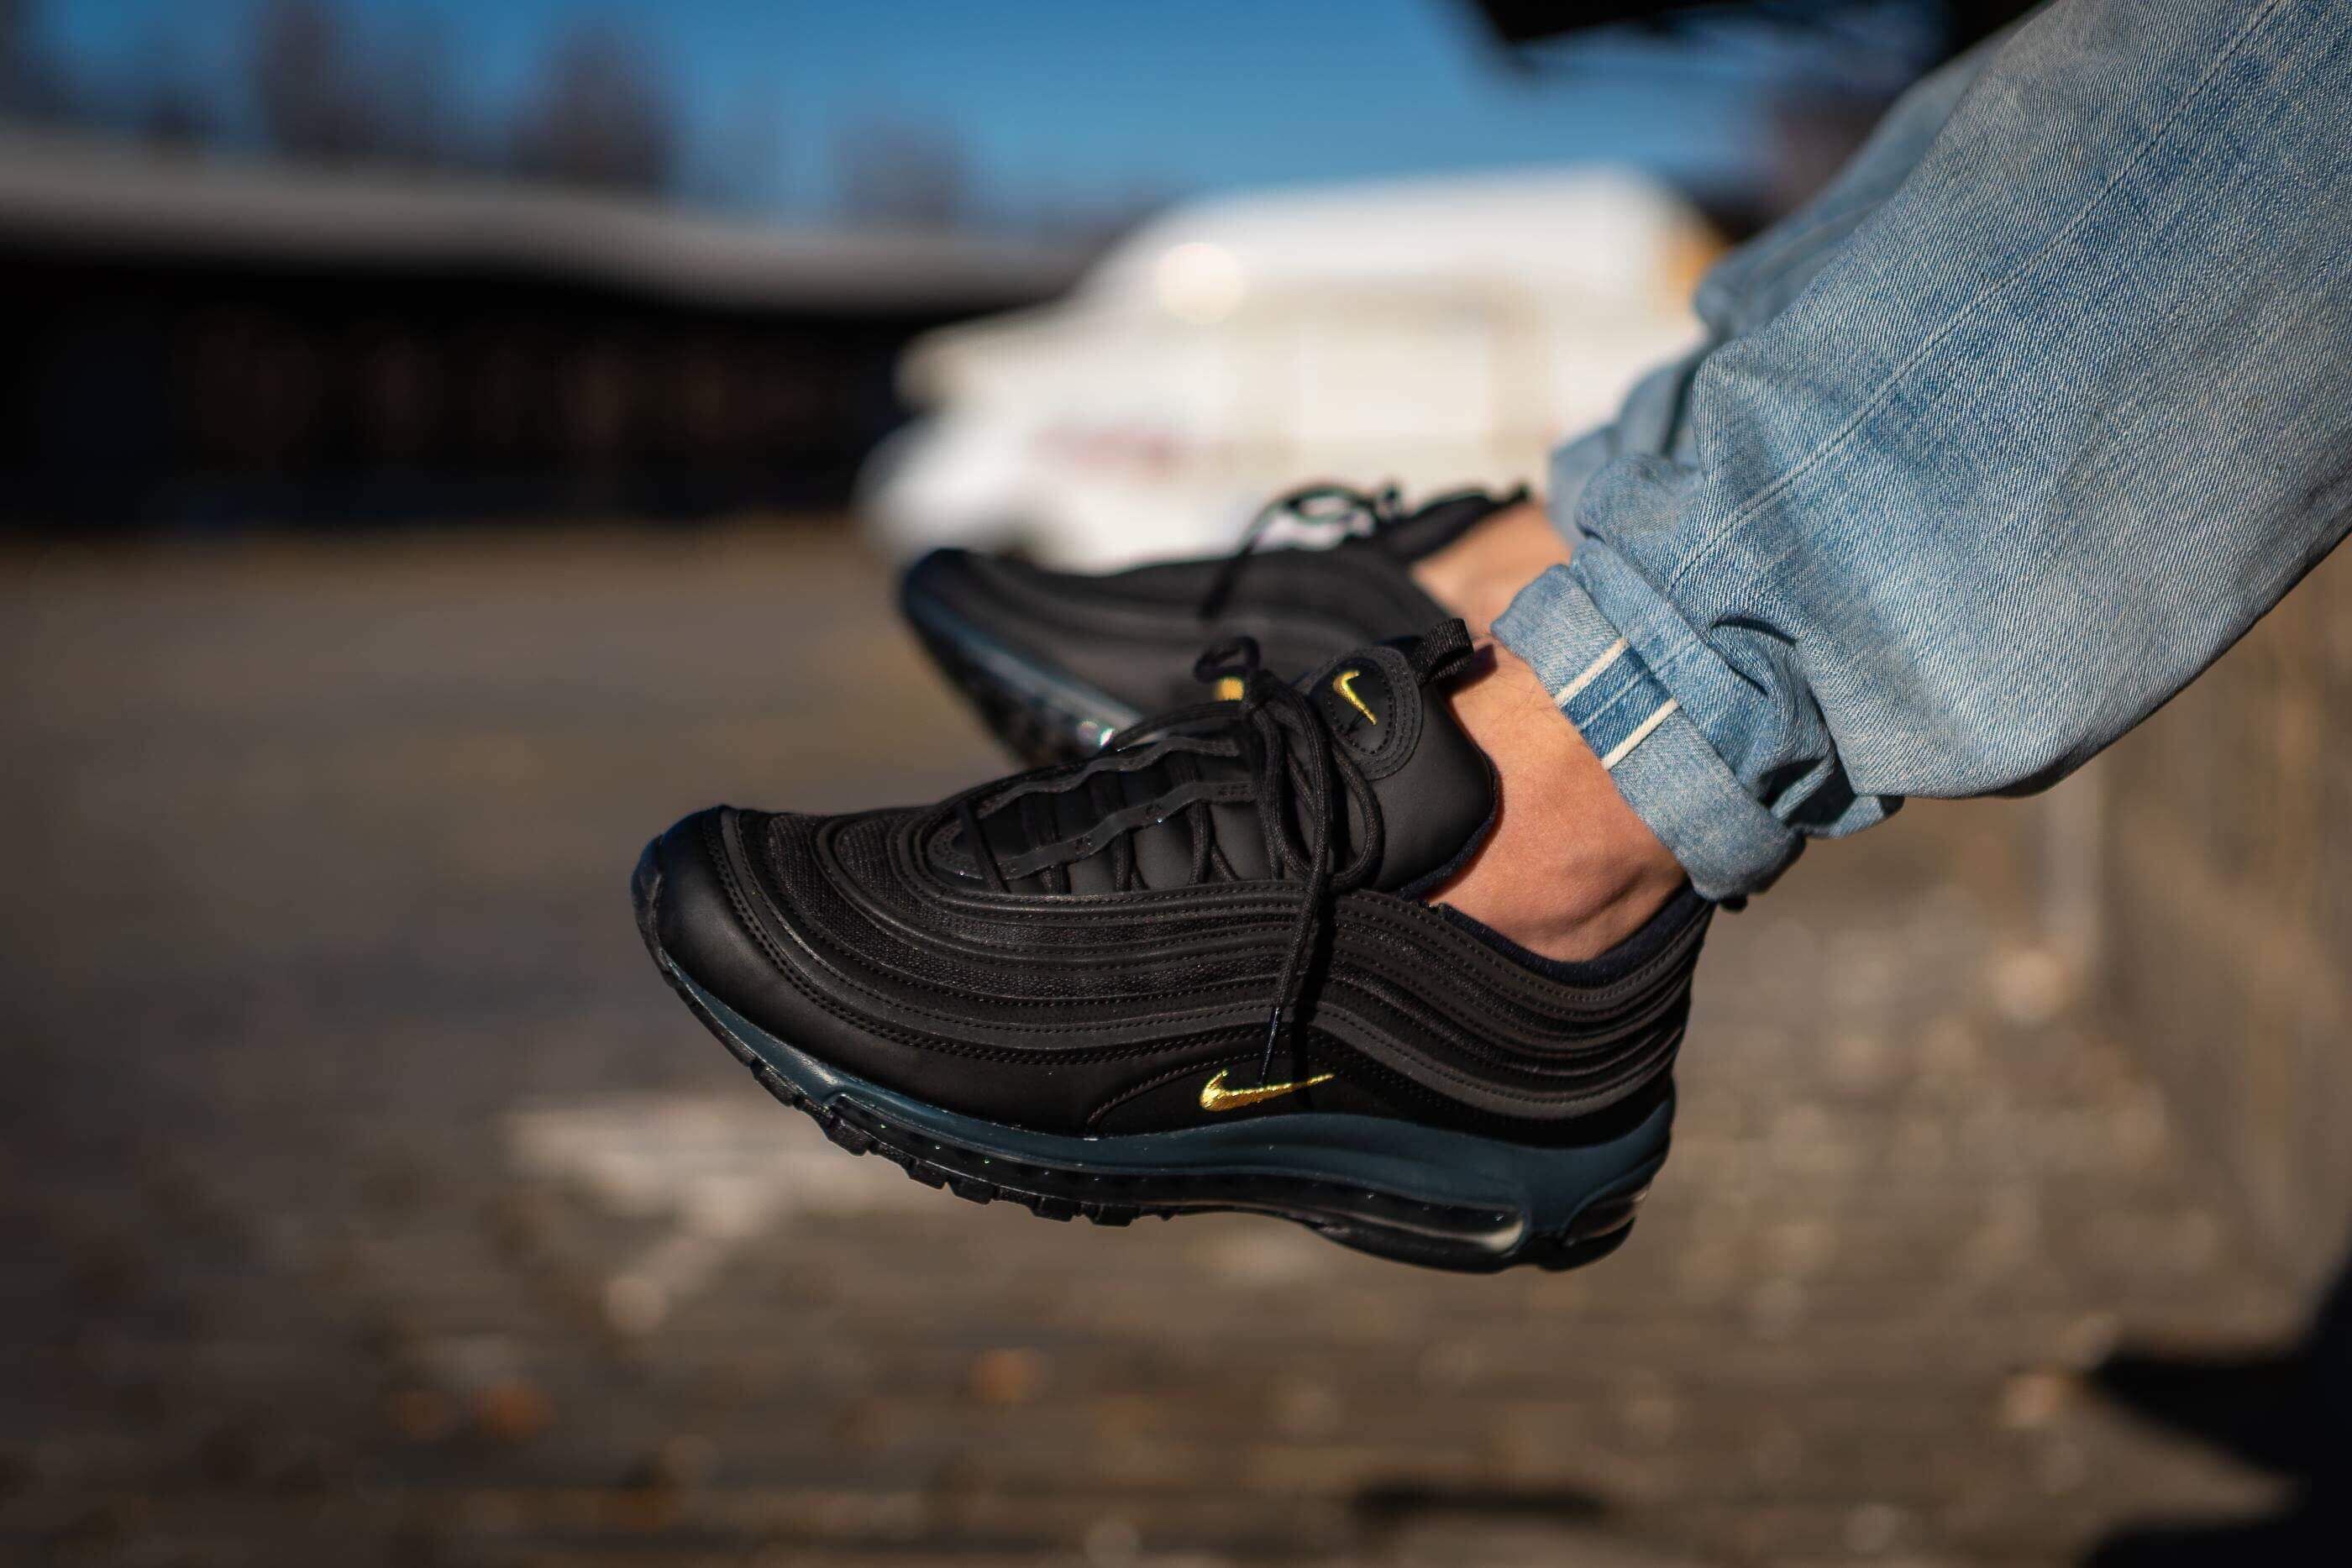 Sole Restocks on Twitter: "Nike Air Max 'Black Gold' Collection FULL RESTOCK at Foot Locker UK Air Max 97 &gt; https://t.co/swLRaPjP0g Tuned 1 &gt; https://t.co/ShkMCkUD4T Tuned 1 Ultra &gt; https://t.co/RuGyhPKQUF https://t.co/pAW74ijRHK" /